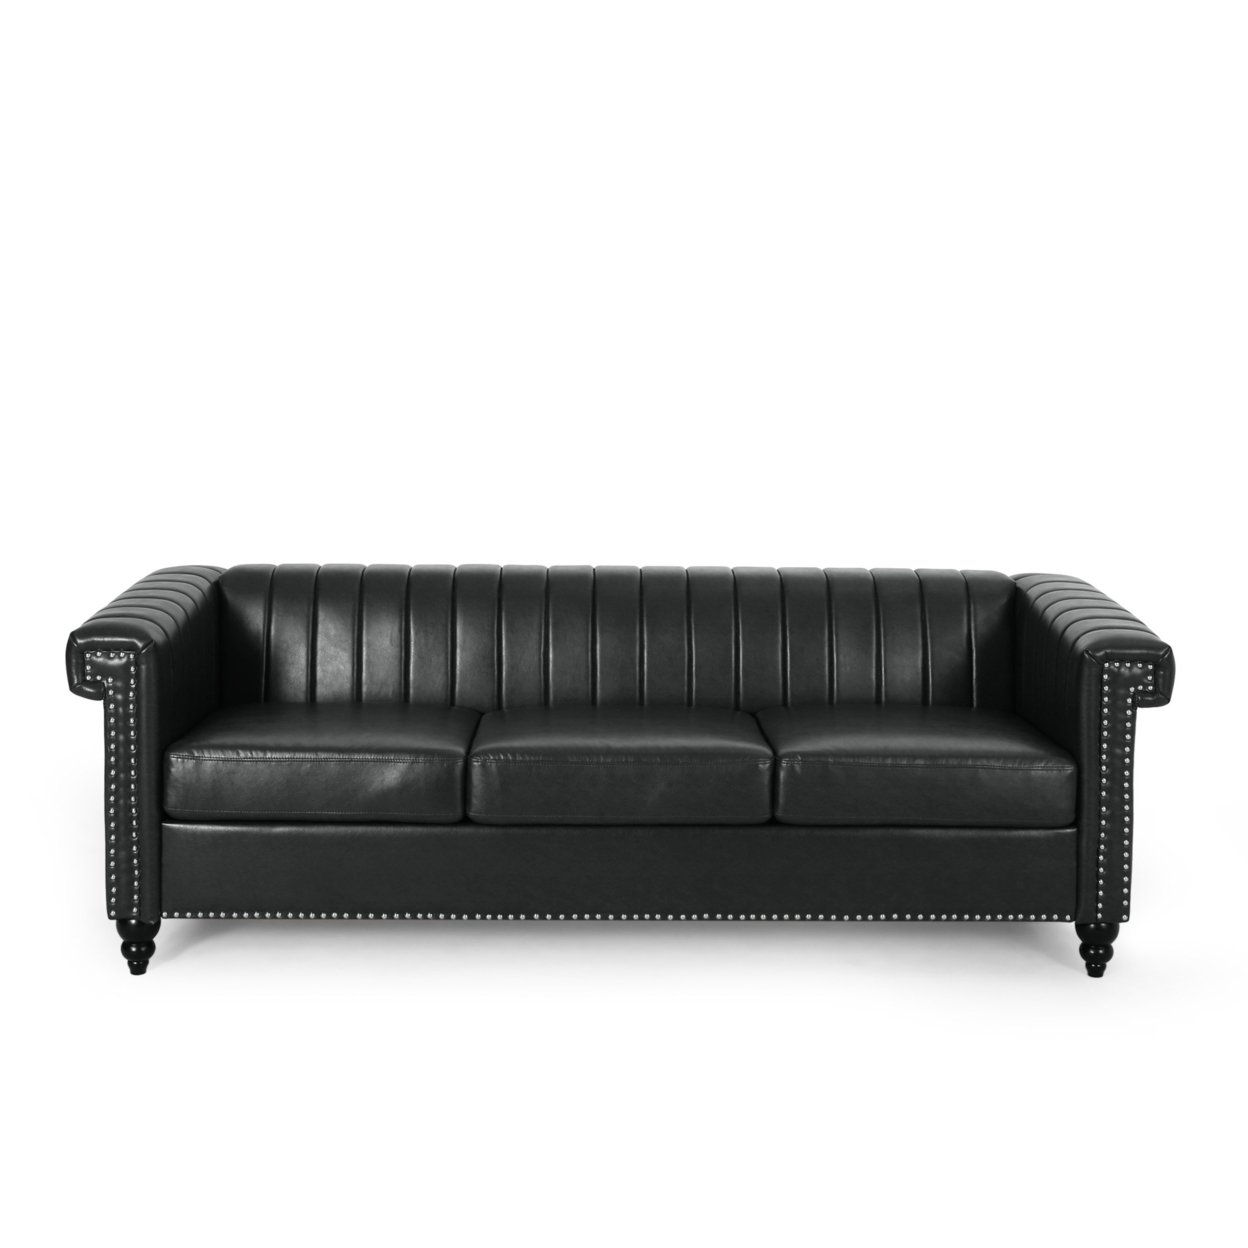 Donley Contemporary Channel Stitch 3 Seater Sofa With Nailhead Trim - Dark Brown